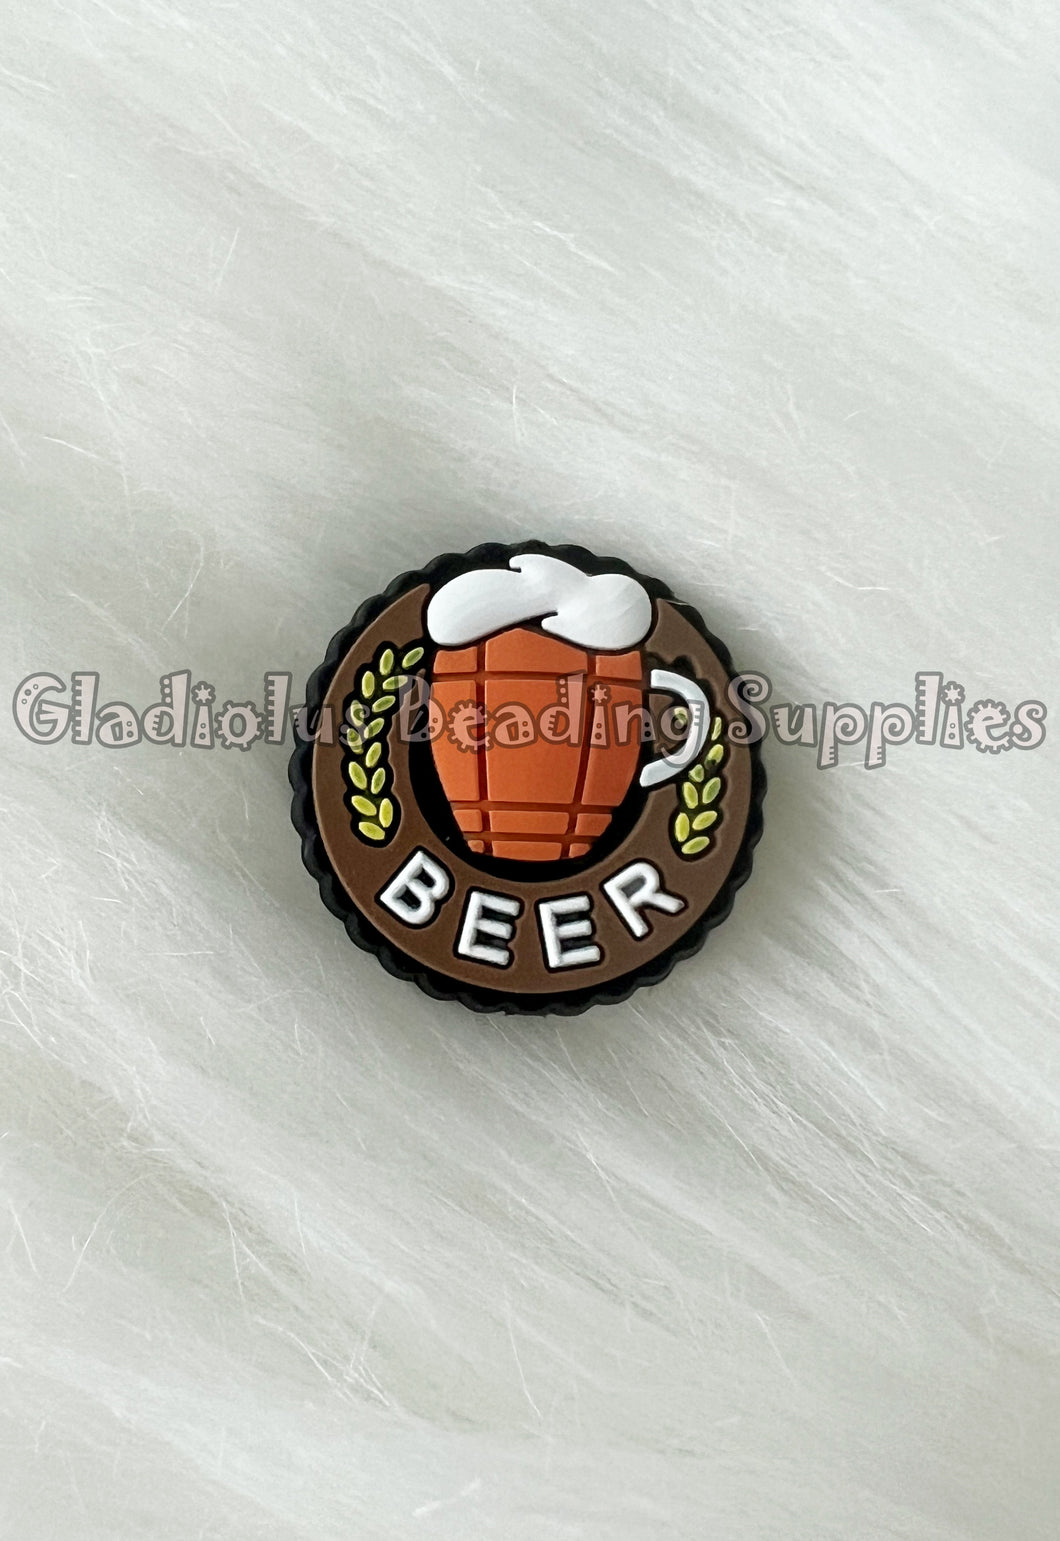 1 Pc 25mm*25mm - Beer Beads - Loose Beads - Silicone Beads - Focal Beads